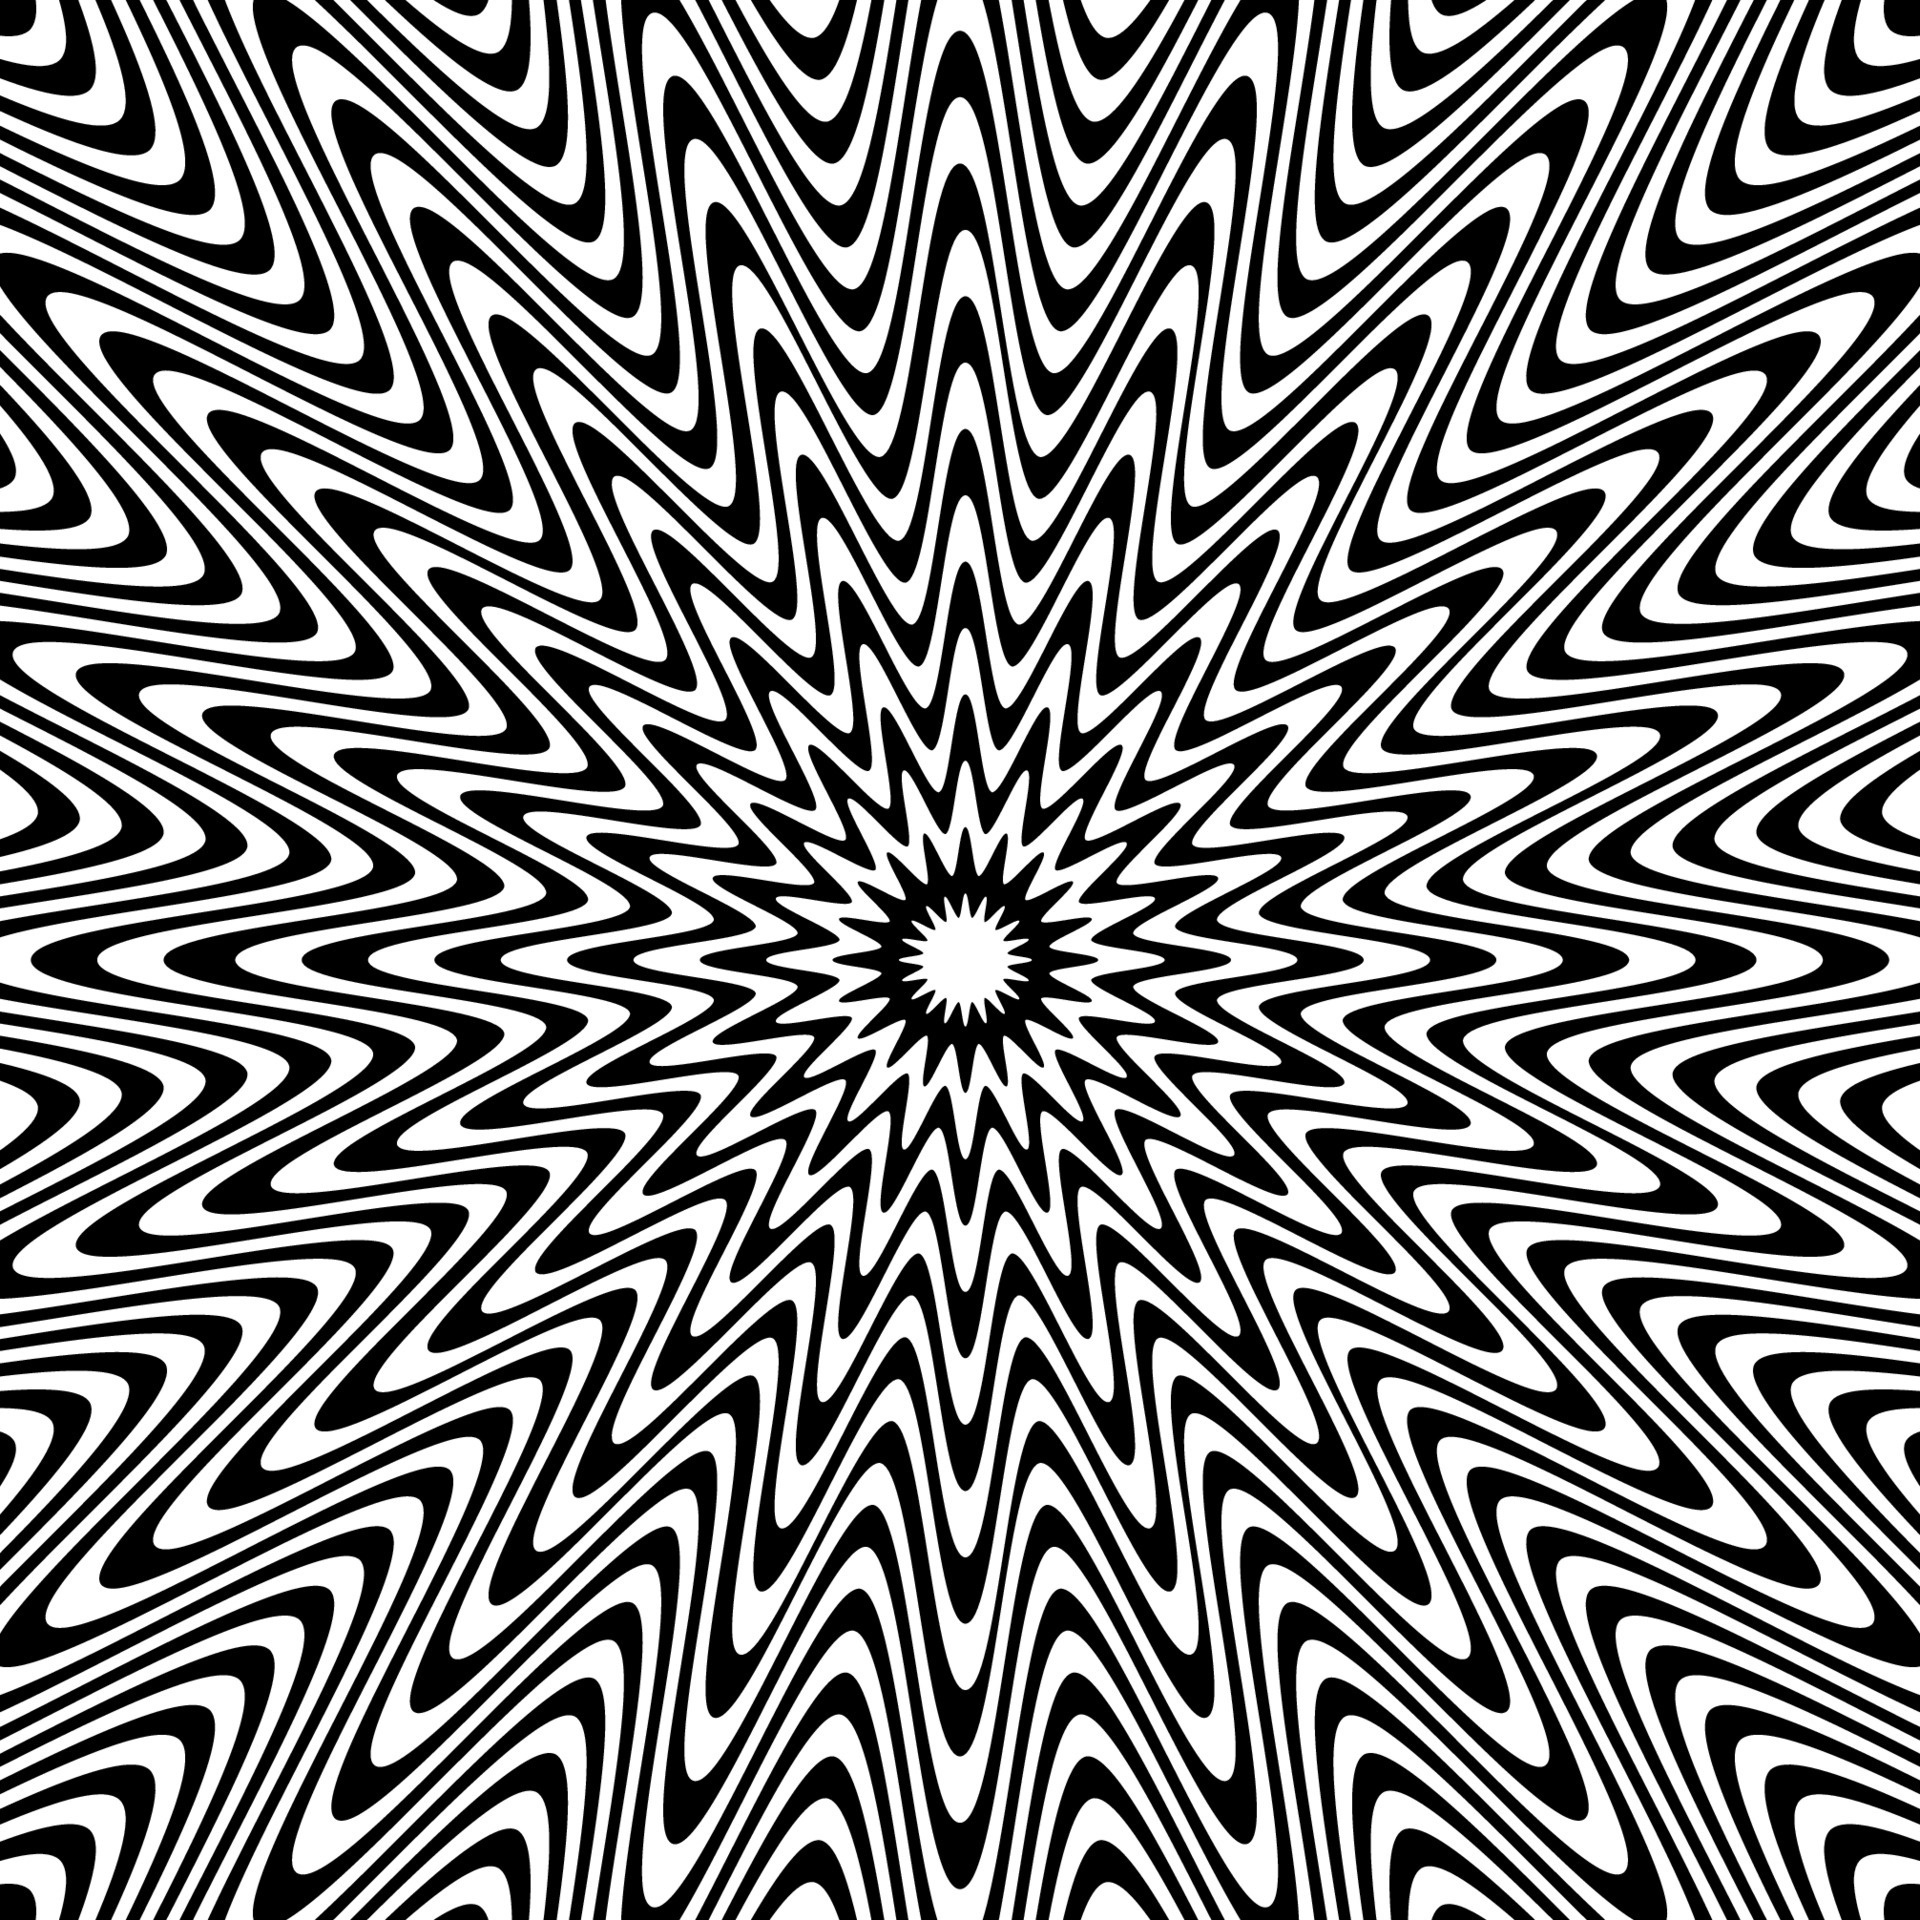 Hypnotic background, Abstract vector art, Psychedelic design, Mesmerizing pattern, 1920x1920 HD Handy